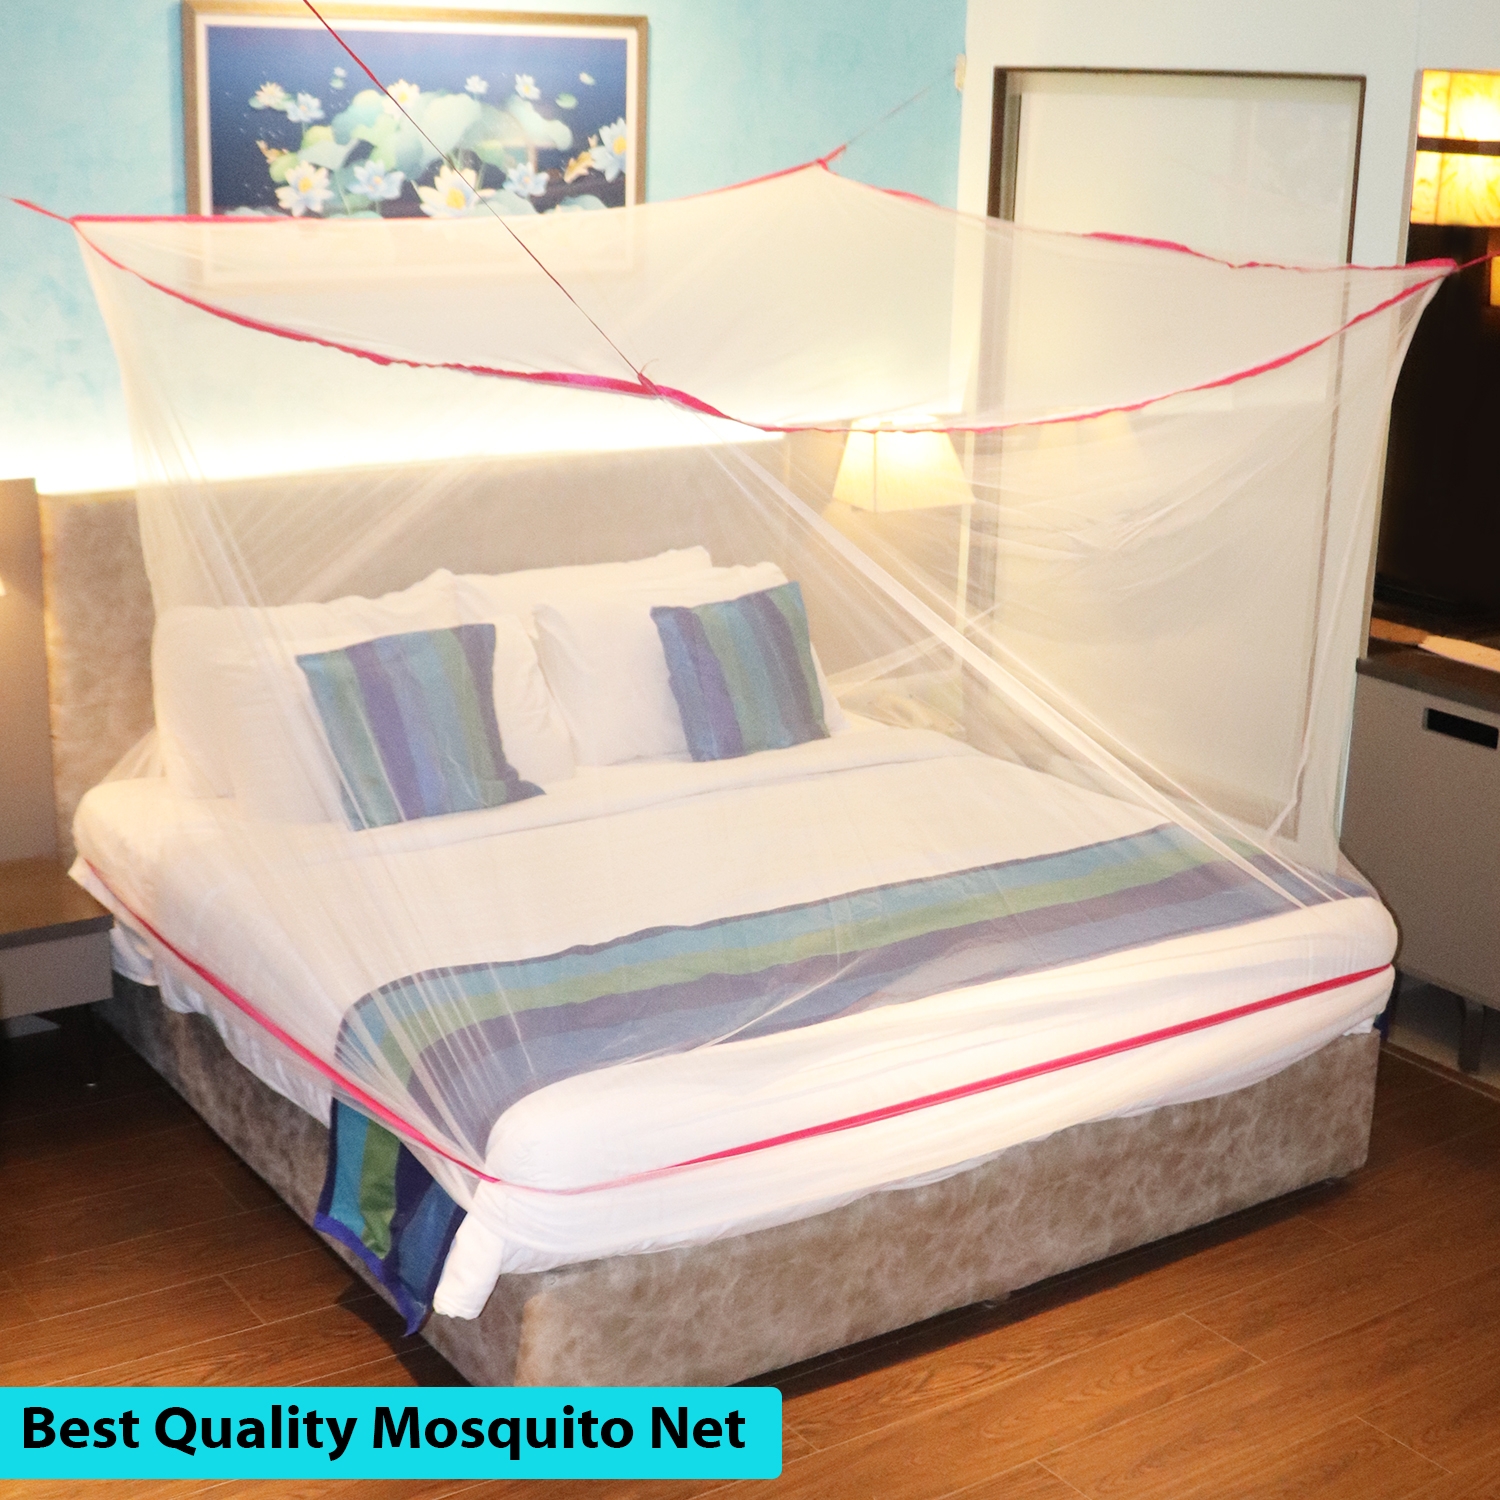 SILVER SHINE | Mosquito Net for Double Bed, King-Size, Square Hanging Foldable Polyester Net White And Pink 1